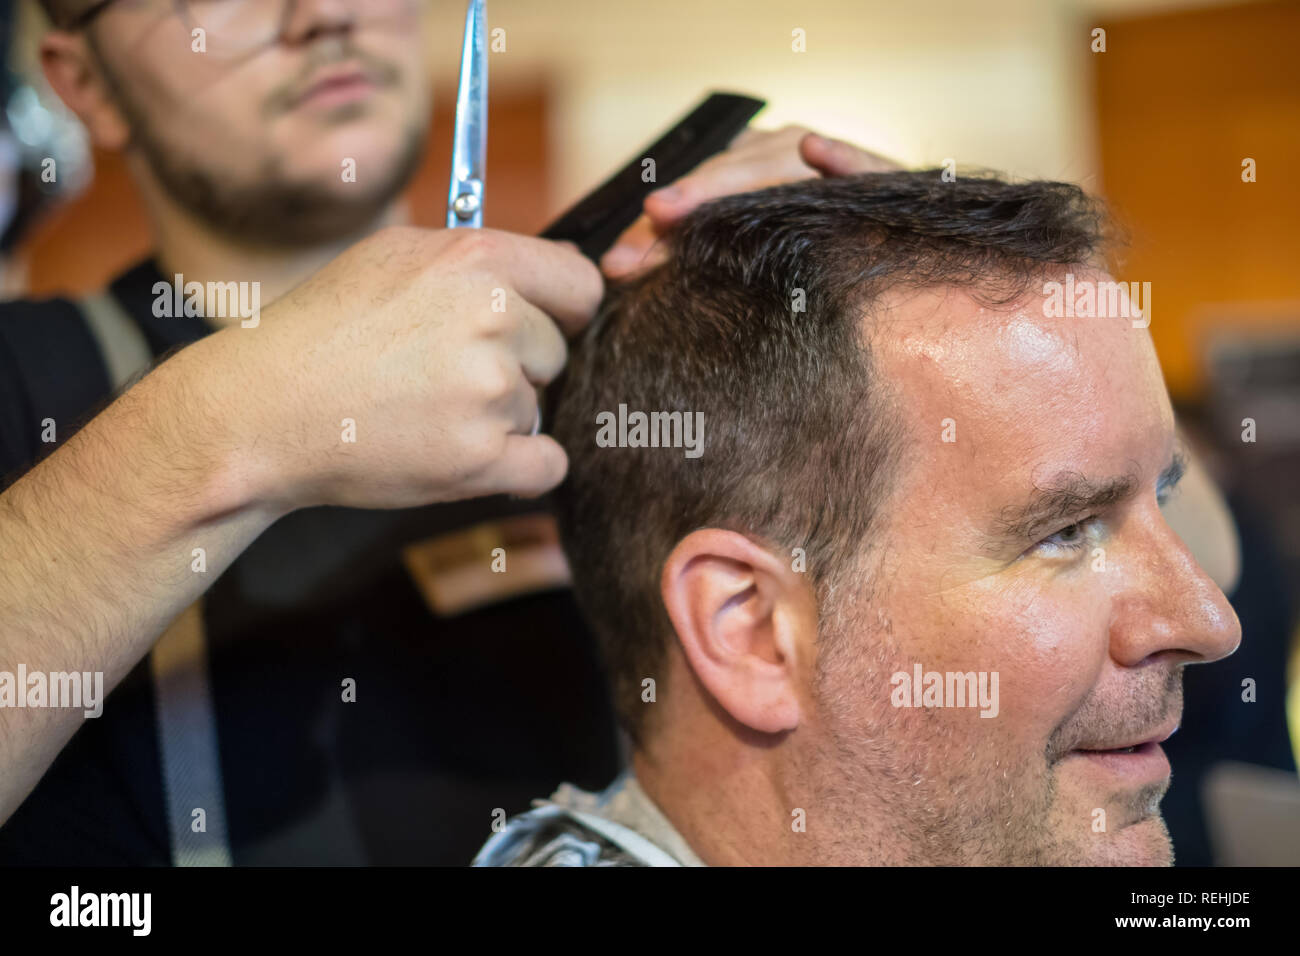 Happy guy getting haircut by hairdresser Stock Photo